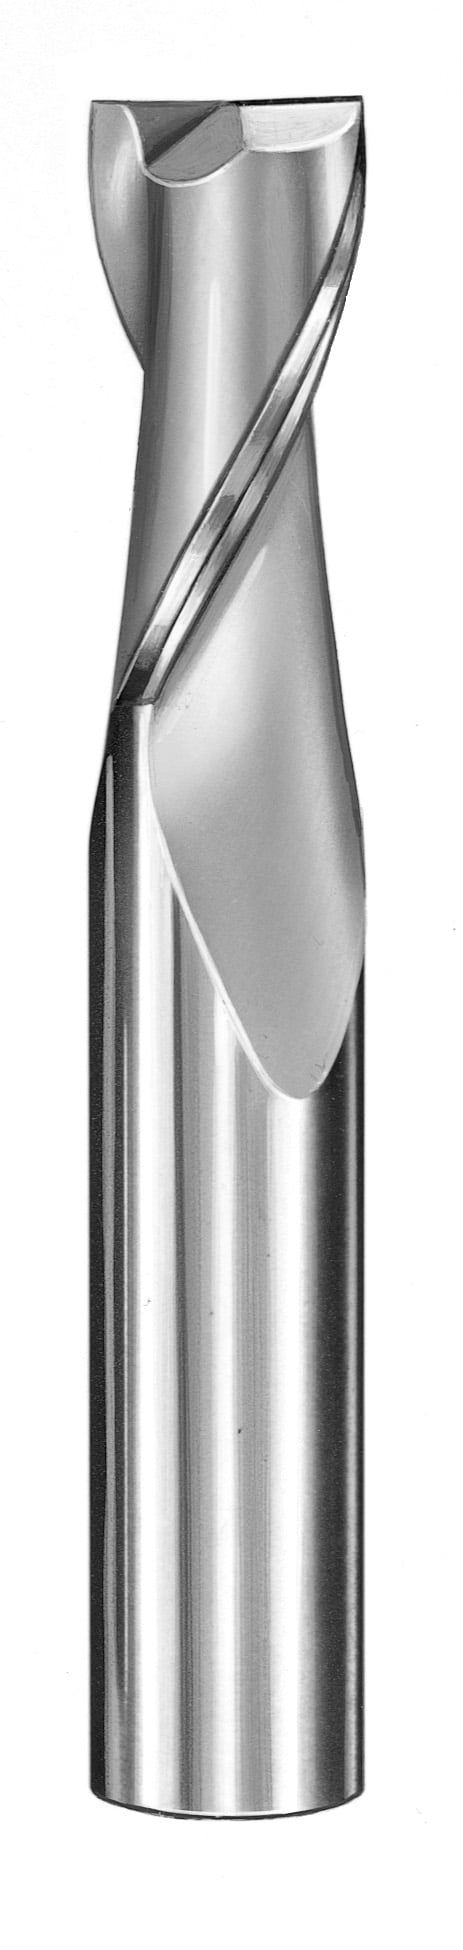 5/16" Dia, 2 Flute, Square End End Mill - 30339